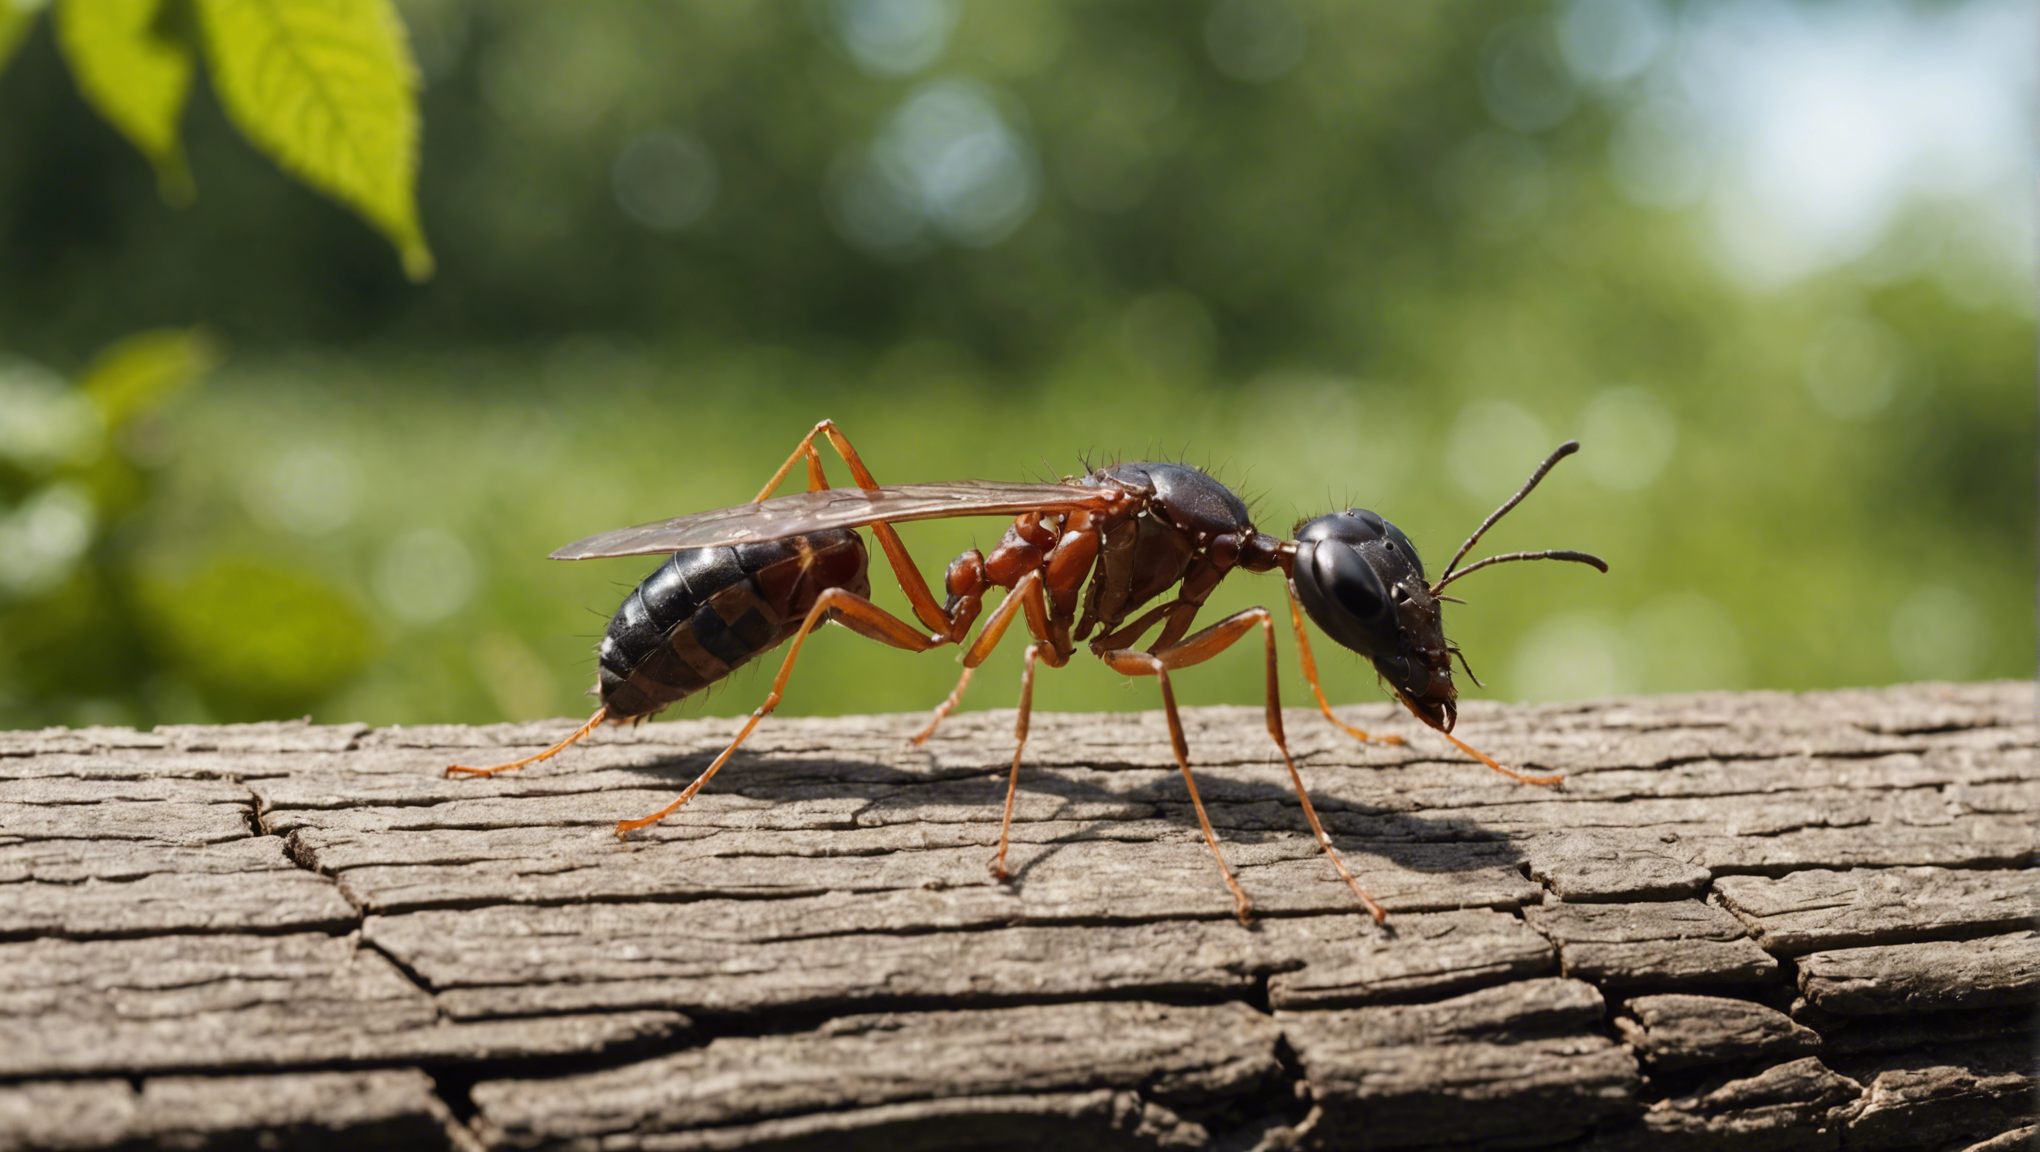 get rid of summer pests with our expert tips! learn how to keep ants, mosquitoes, and flies away and enjoy a pest-free summer.